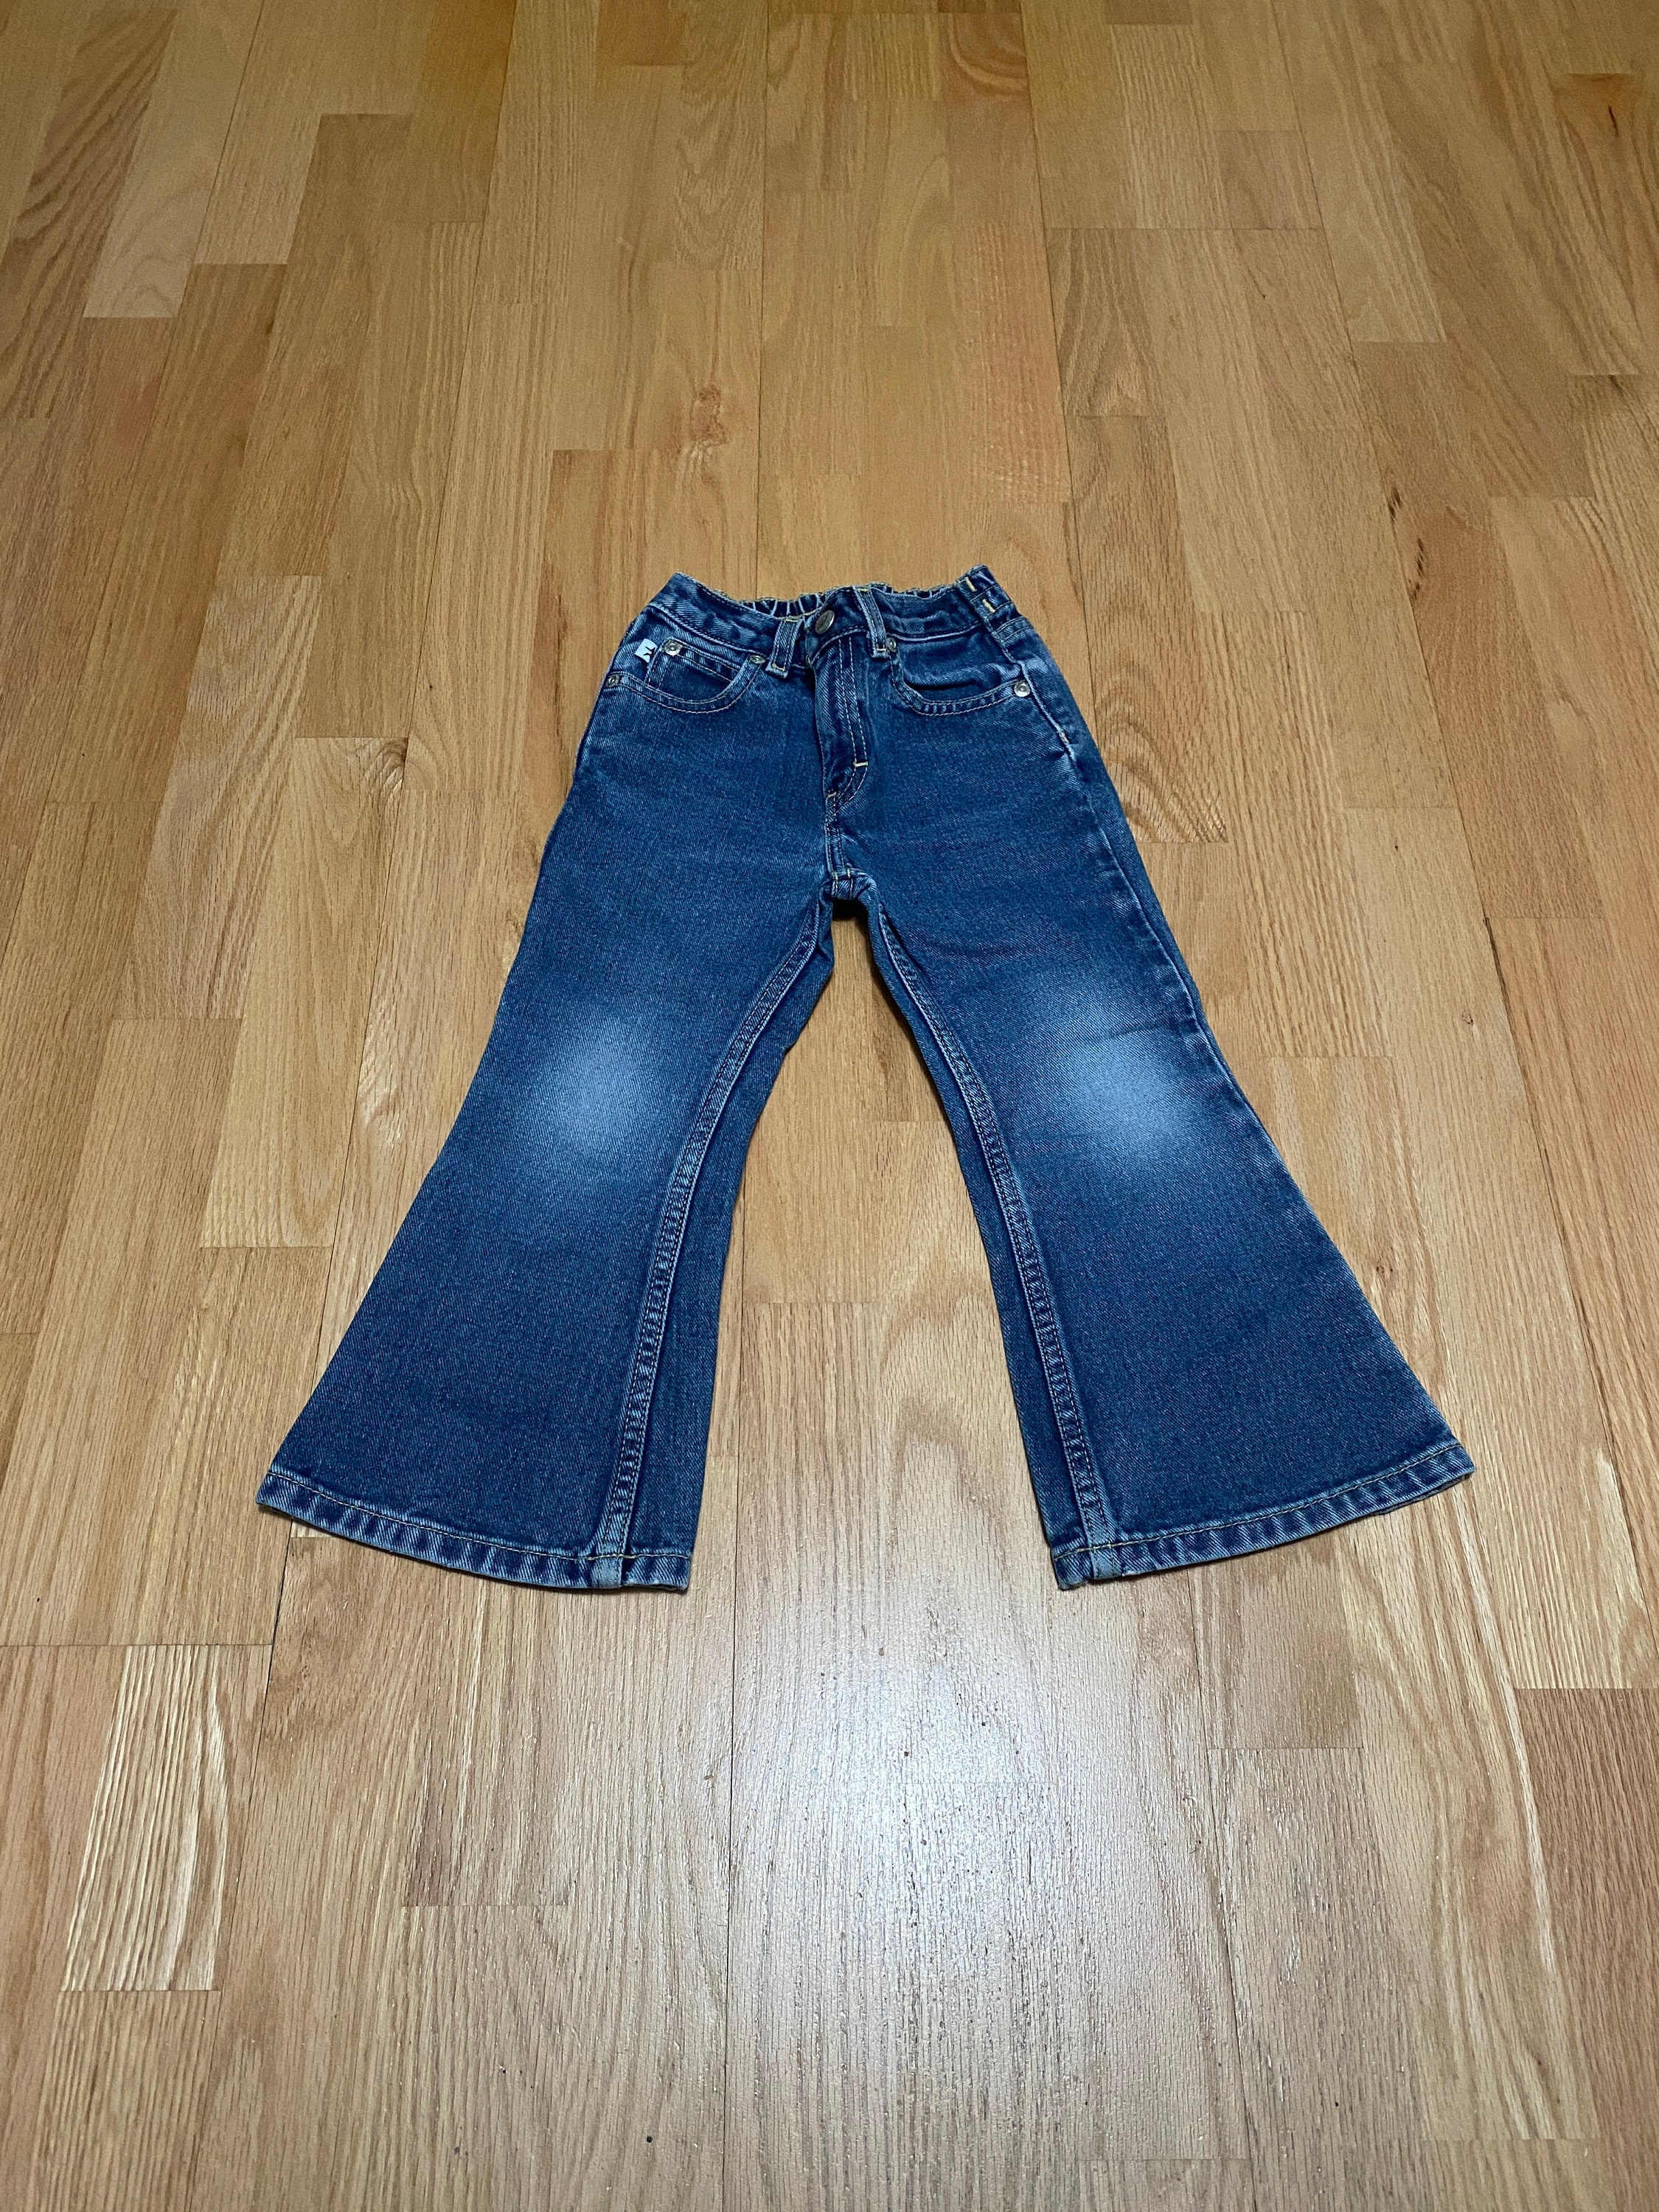 Vintage Jeans, Blue Flat Front, 70s Era, Size 38 X 30: A Cute Retro Pair of  Soft Dress Pant Style Jeans With a 39 Waist 